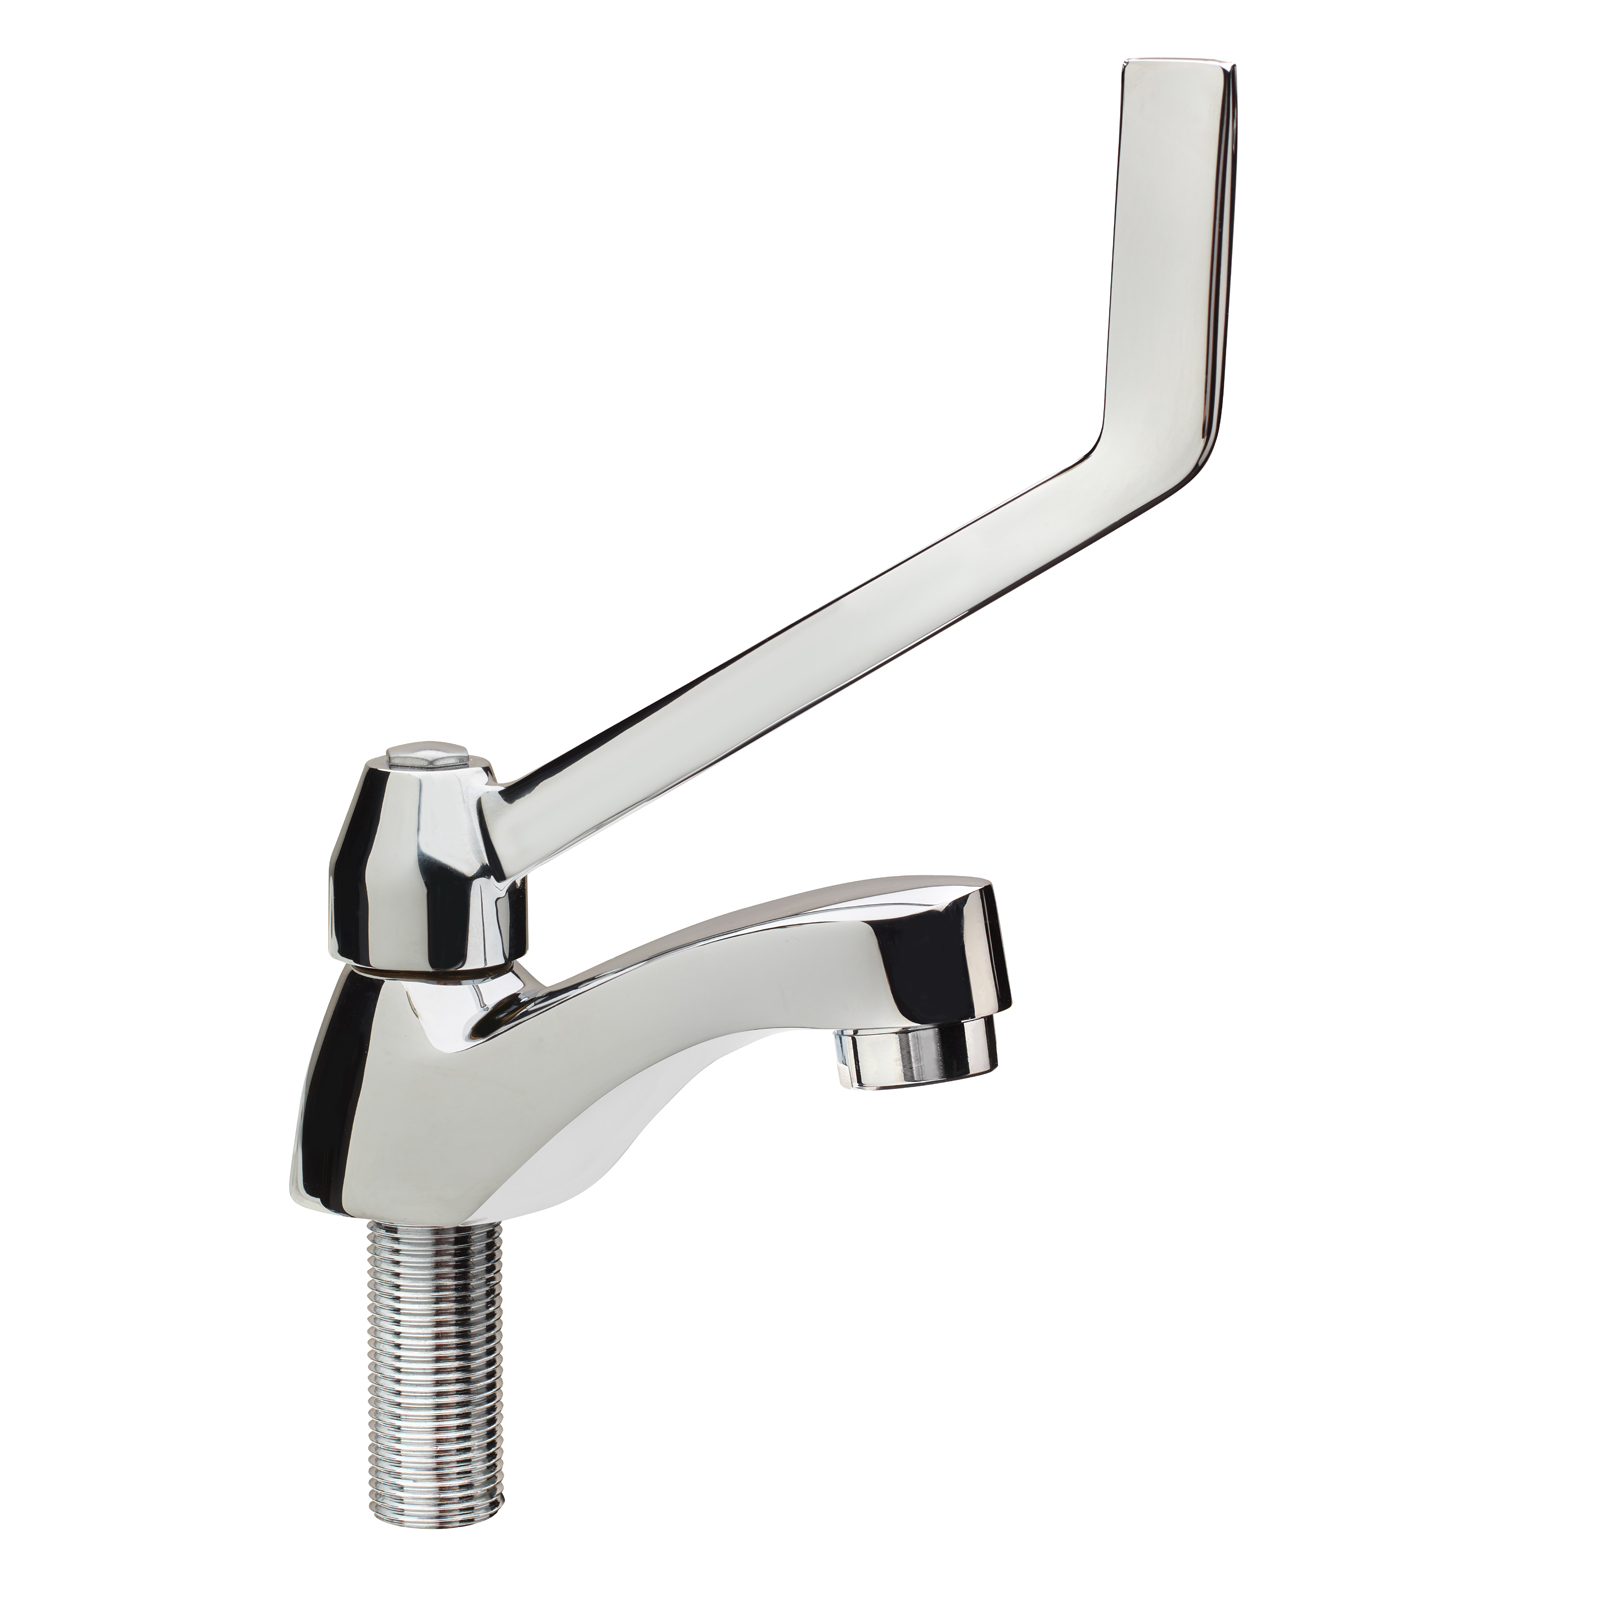 Swan shaped tap with clinical lever